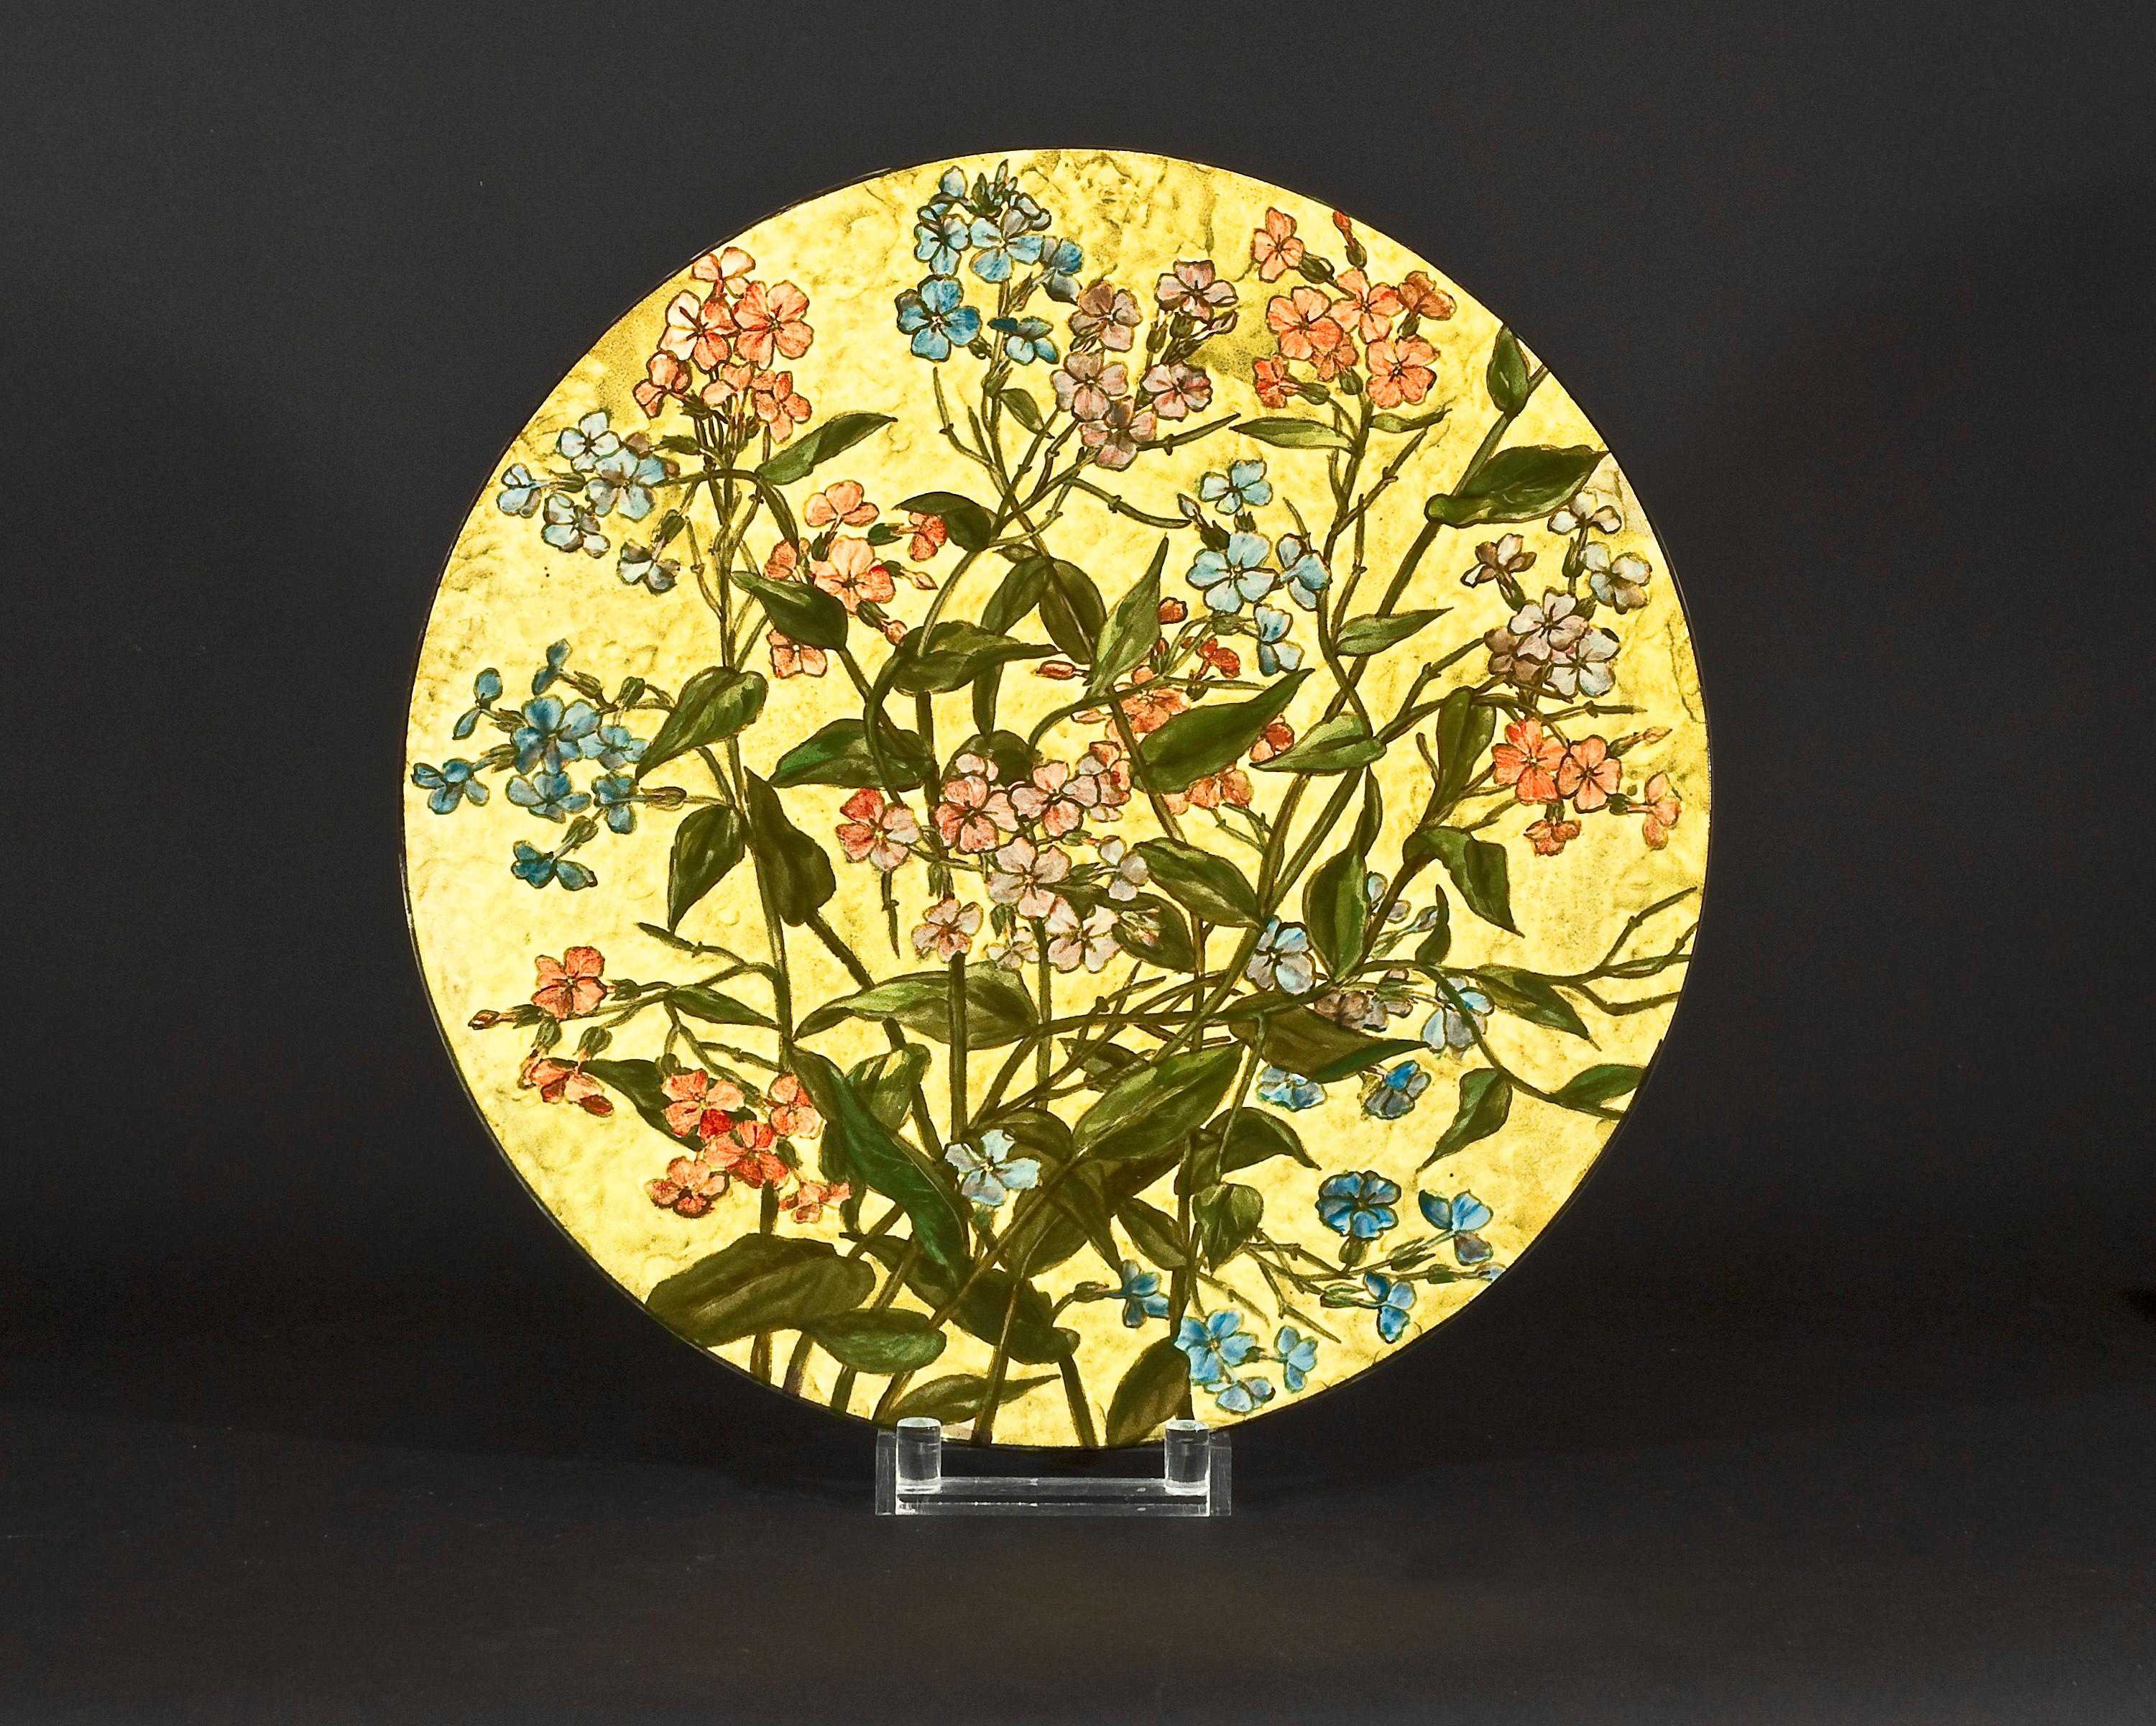 FAPG 20247D
John Bennett (1840-1907), New York
Plaque with pink and blue phlox, circa 1881-1882
Earthenware, painted and glazed
Measures: 14 7/8 in. diameter, 1 13/16 in. high
Signed and inscribed (on the back): J B[monogram] ENNETT / 
E 24